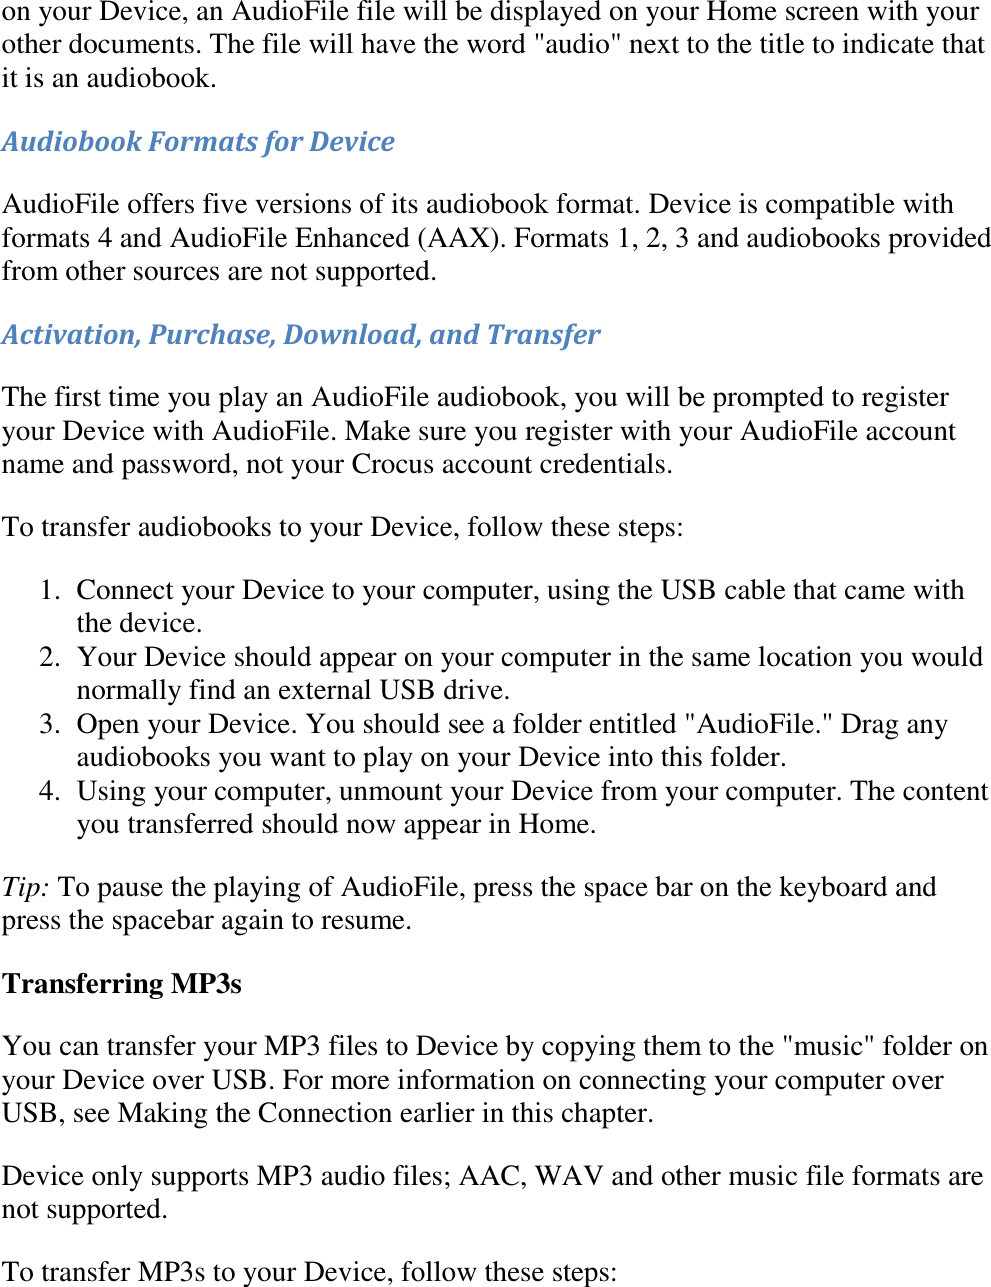   on your Device, an AudioFile file will be displayed on your Home screen with your other documents. The file will have the word &quot;audio&quot; next to the title to indicate that it is an audiobook. Audiobook Formats for Device AudioFile offers five versions of its audiobook format. Device is compatible with formats 4 and AudioFile Enhanced (AAX). Formats 1, 2, 3 and audiobooks provided from other sources are not supported. Activation, Purchase, Download, and Transfer The first time you play an AudioFile audiobook, you will be prompted to register your Device with AudioFile. Make sure you register with your AudioFile account name and password, not your Crocus account credentials. To transfer audiobooks to your Device, follow these steps: 1. Connect your Device to your computer, using the USB cable that came with the device.  2. Your Device should appear on your computer in the same location you would normally find an external USB drive.  3. Open your Device. You should see a folder entitled &quot;AudioFile.&quot; Drag any audiobooks you want to play on your Device into this folder.  4. Using your computer, unmount your Device from your computer. The content you transferred should now appear in Home.  Tip: To pause the playing of AudioFile, press the space bar on the keyboard and press the spacebar again to resume. Transferring MP3s You can transfer your MP3 files to Device by copying them to the &quot;music&quot; folder on your Device over USB. For more information on connecting your computer over USB, see Making the Connection earlier in this chapter. Device only supports MP3 audio files; AAC, WAV and other music file formats are not supported. To transfer MP3s to your Device, follow these steps: 